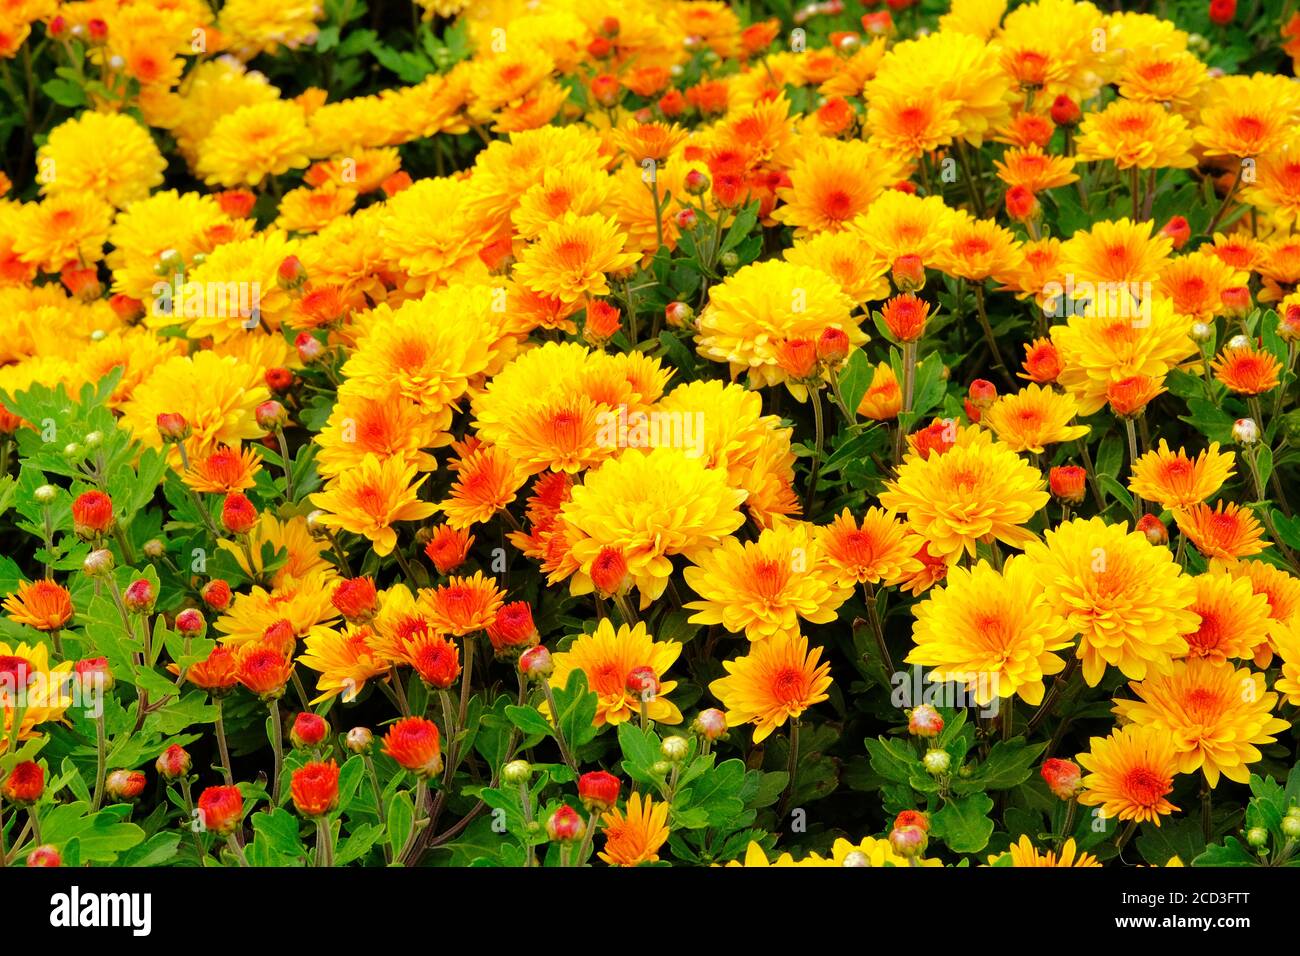 Chrysanthemums in botanical park, greenery in city. Orange flowers chrysanthemums in autumn. Blooming nature background. Stock Photo